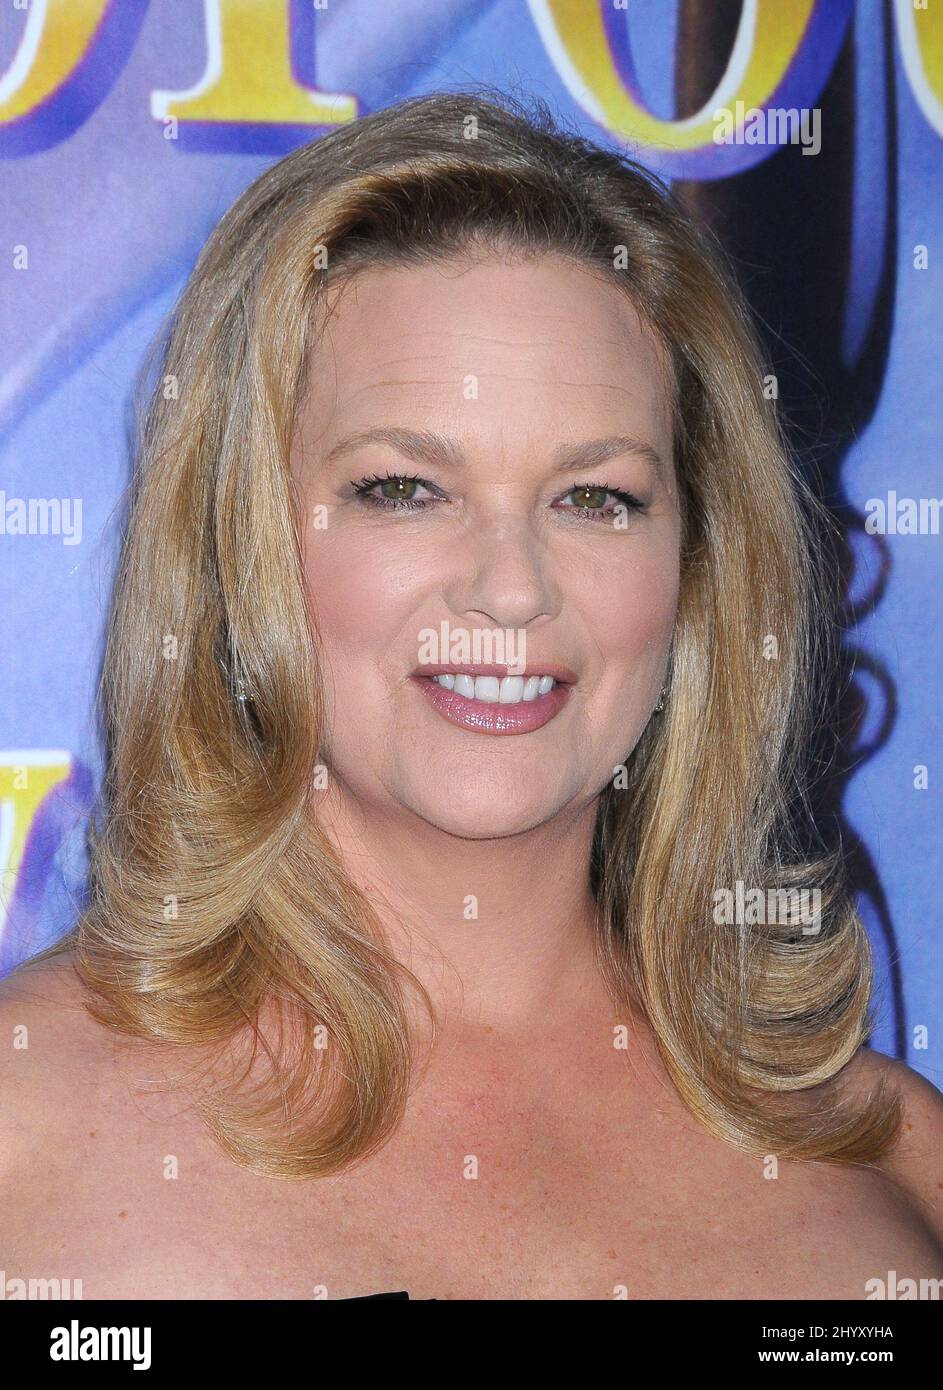 Leann Hunley during the 'Days of Our Lives' 45th Anniversary party held at the House of Blues, California Stock Photo